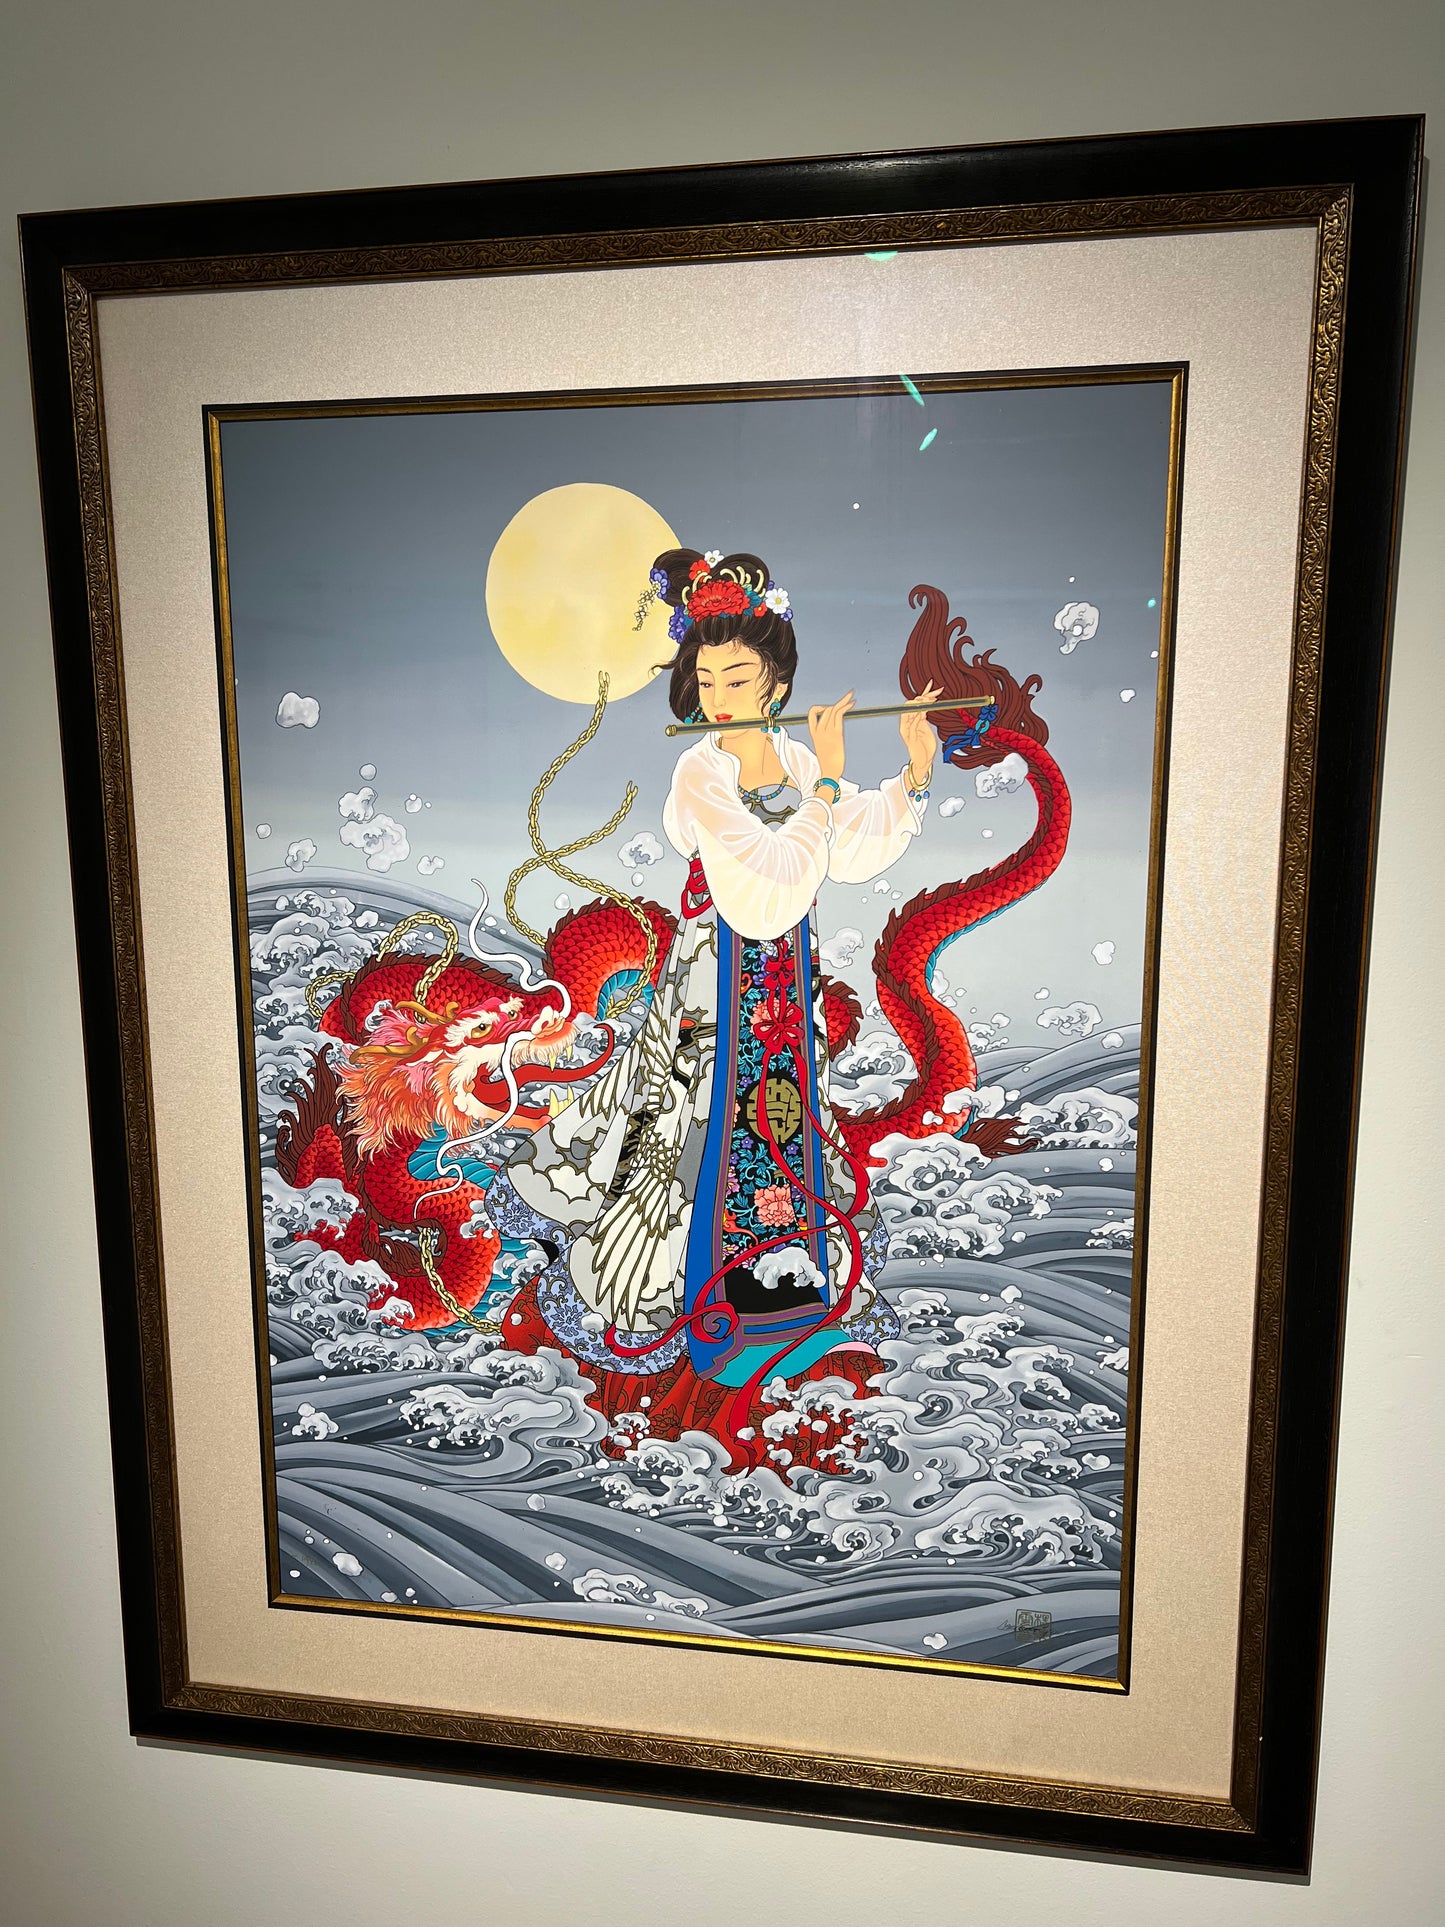 Caroline Young Framed Limited Print "Dragon King's Daughter" 47"x37"